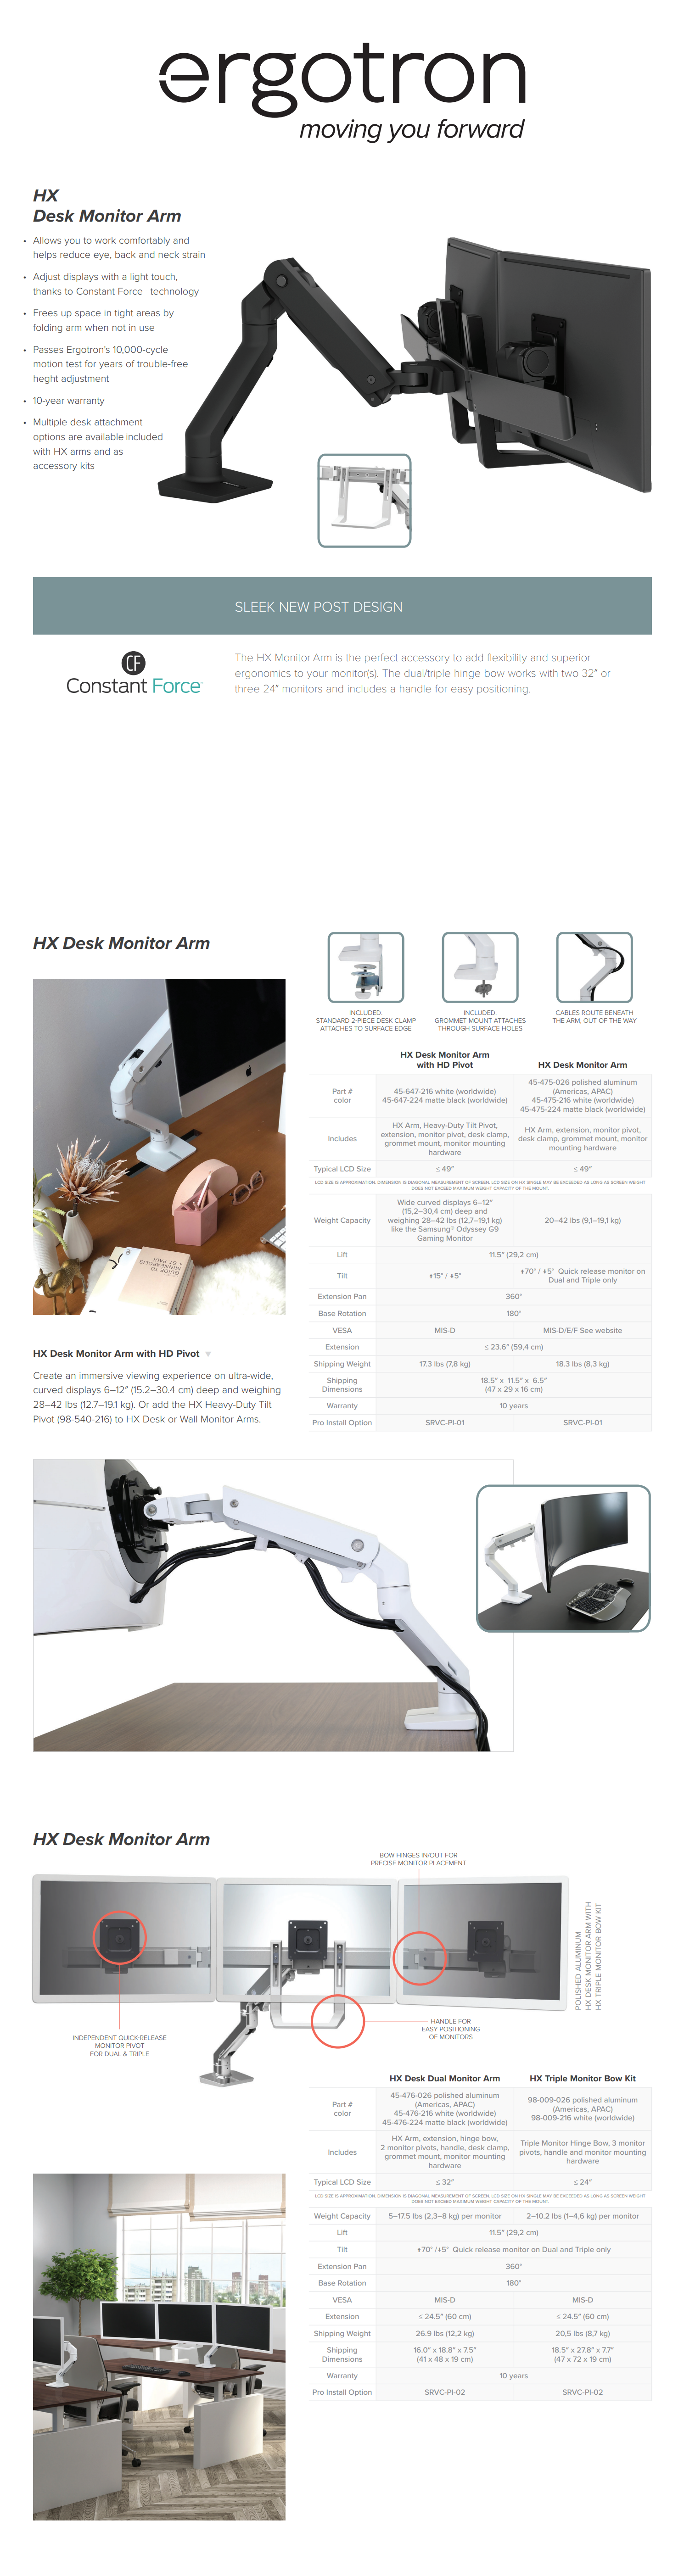 A large marketing image providing additional information about the product Ergotron HX Desk Monitor Arm - White - Additional alt info not provided